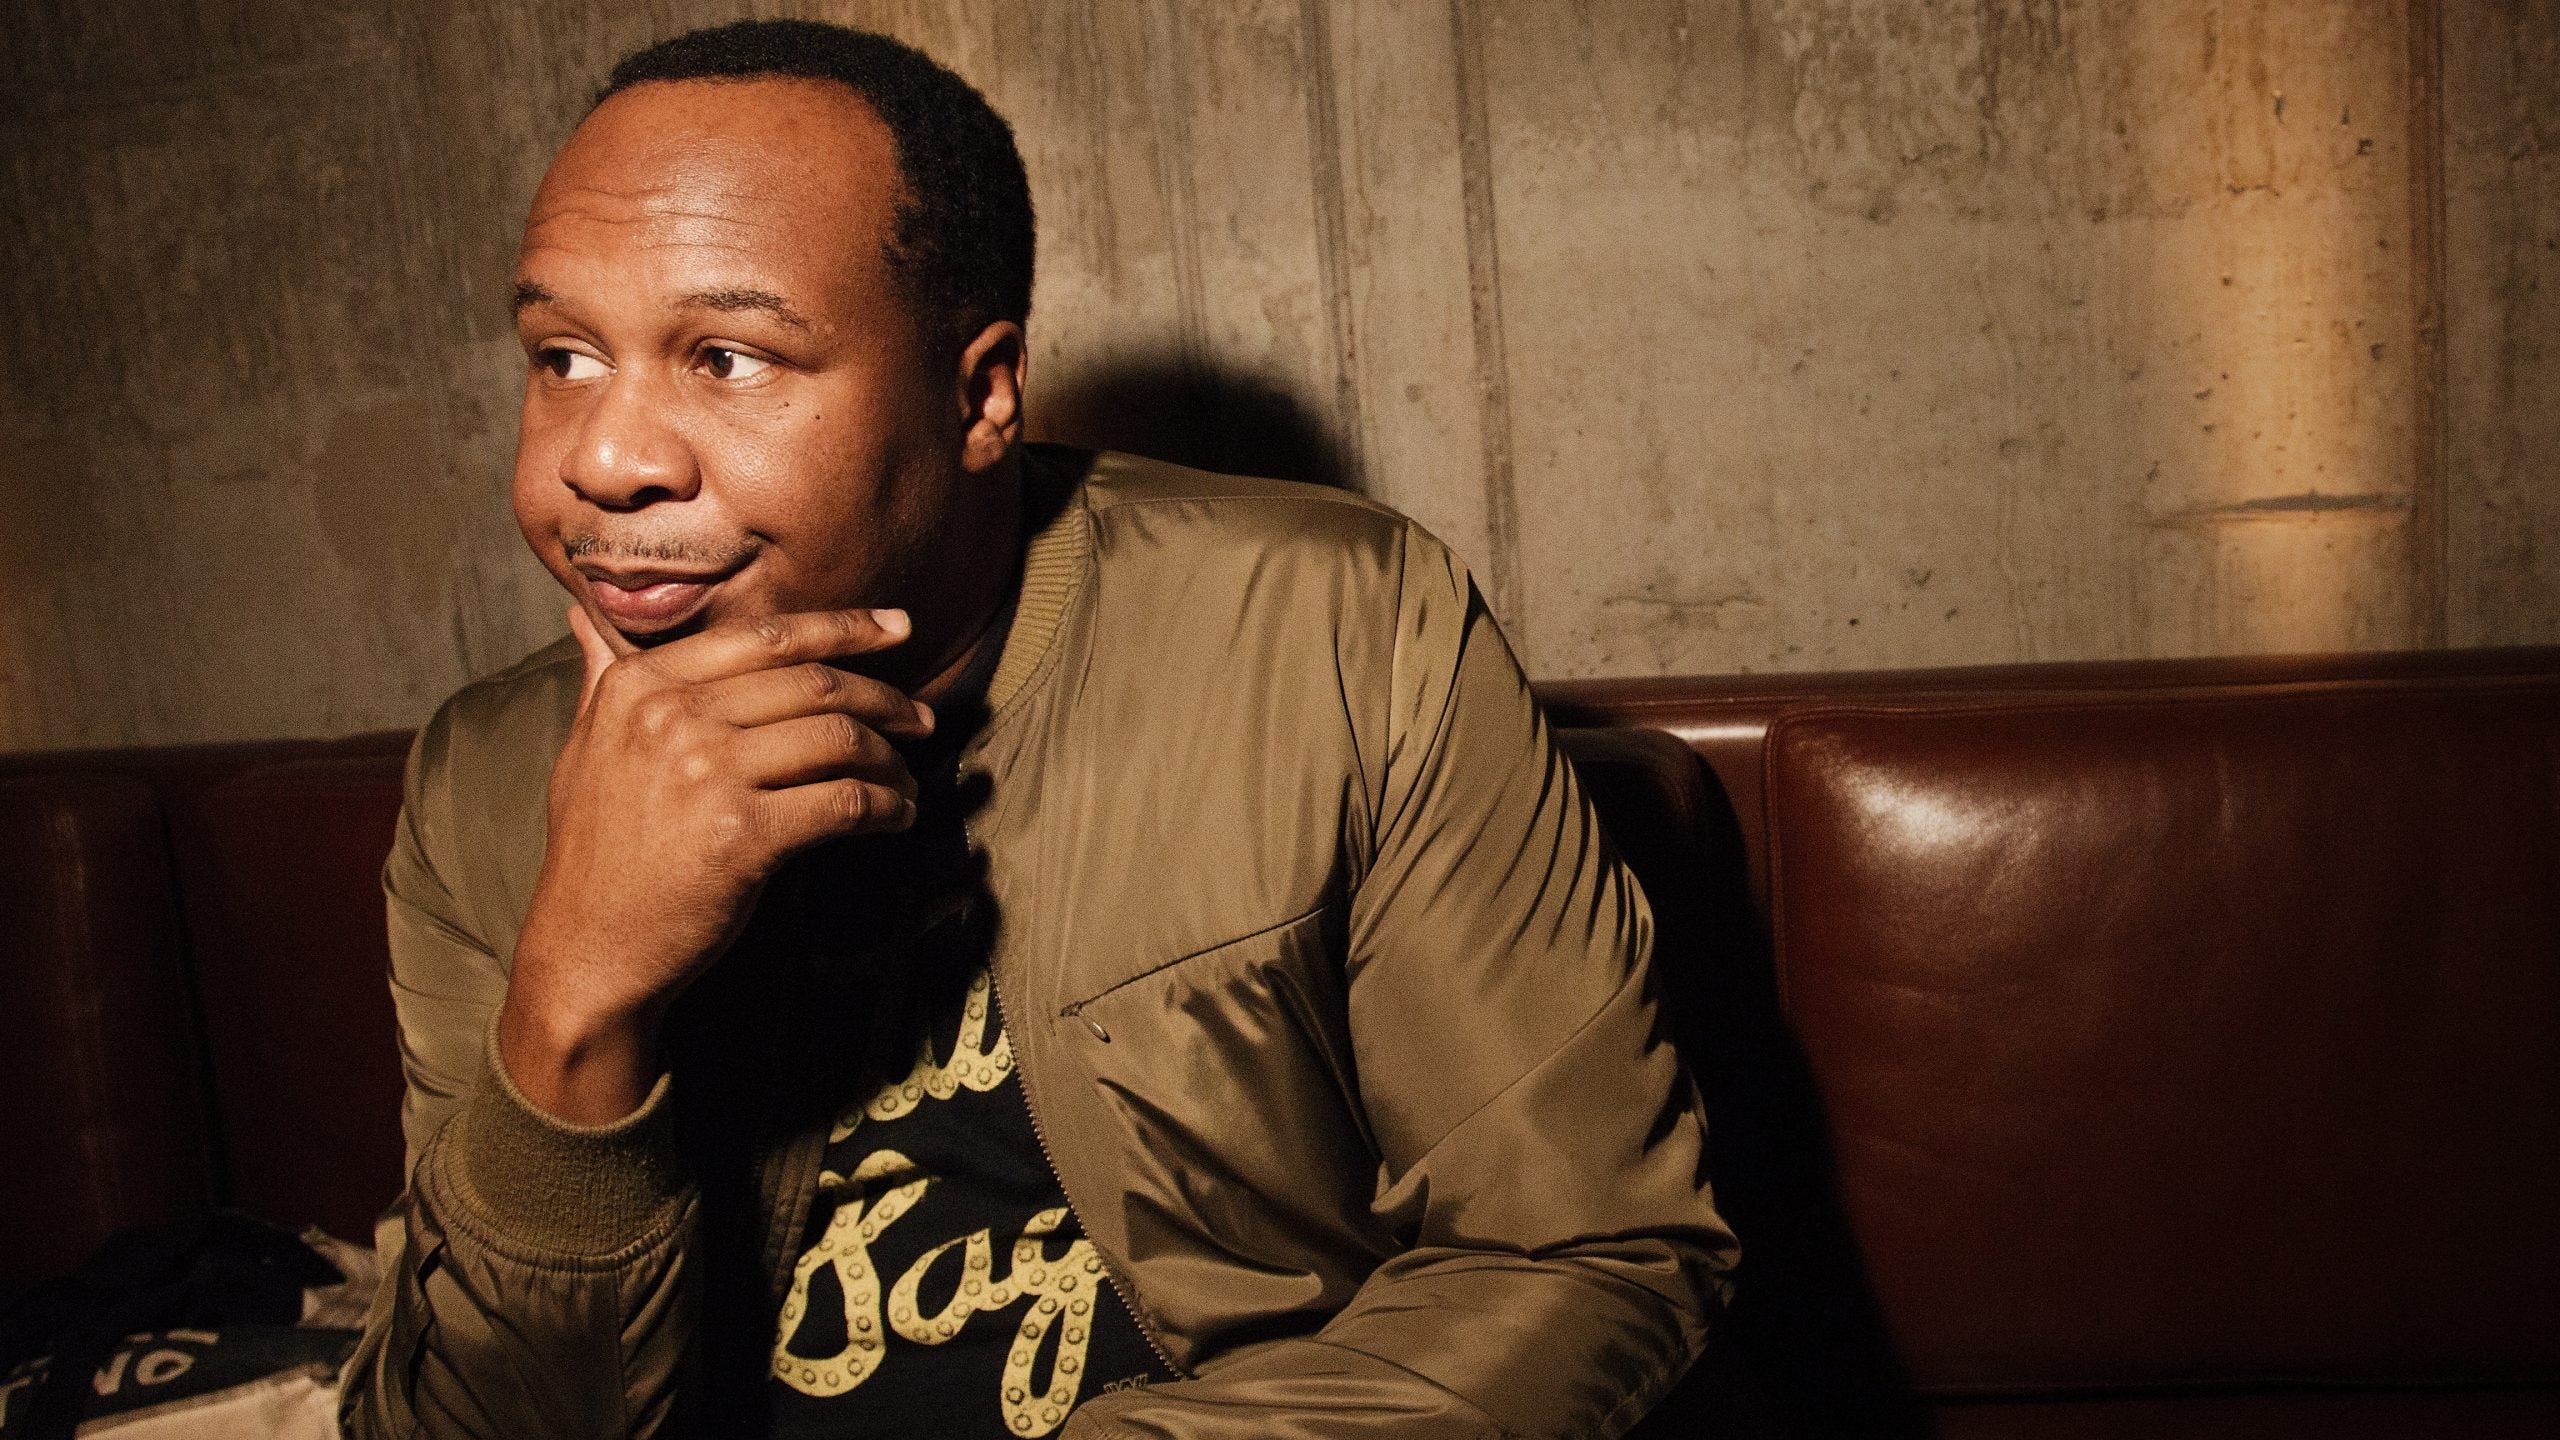 Comic Roy Wood Jr. Gathers Support For Comedy Club Employees Affected By Covid-19